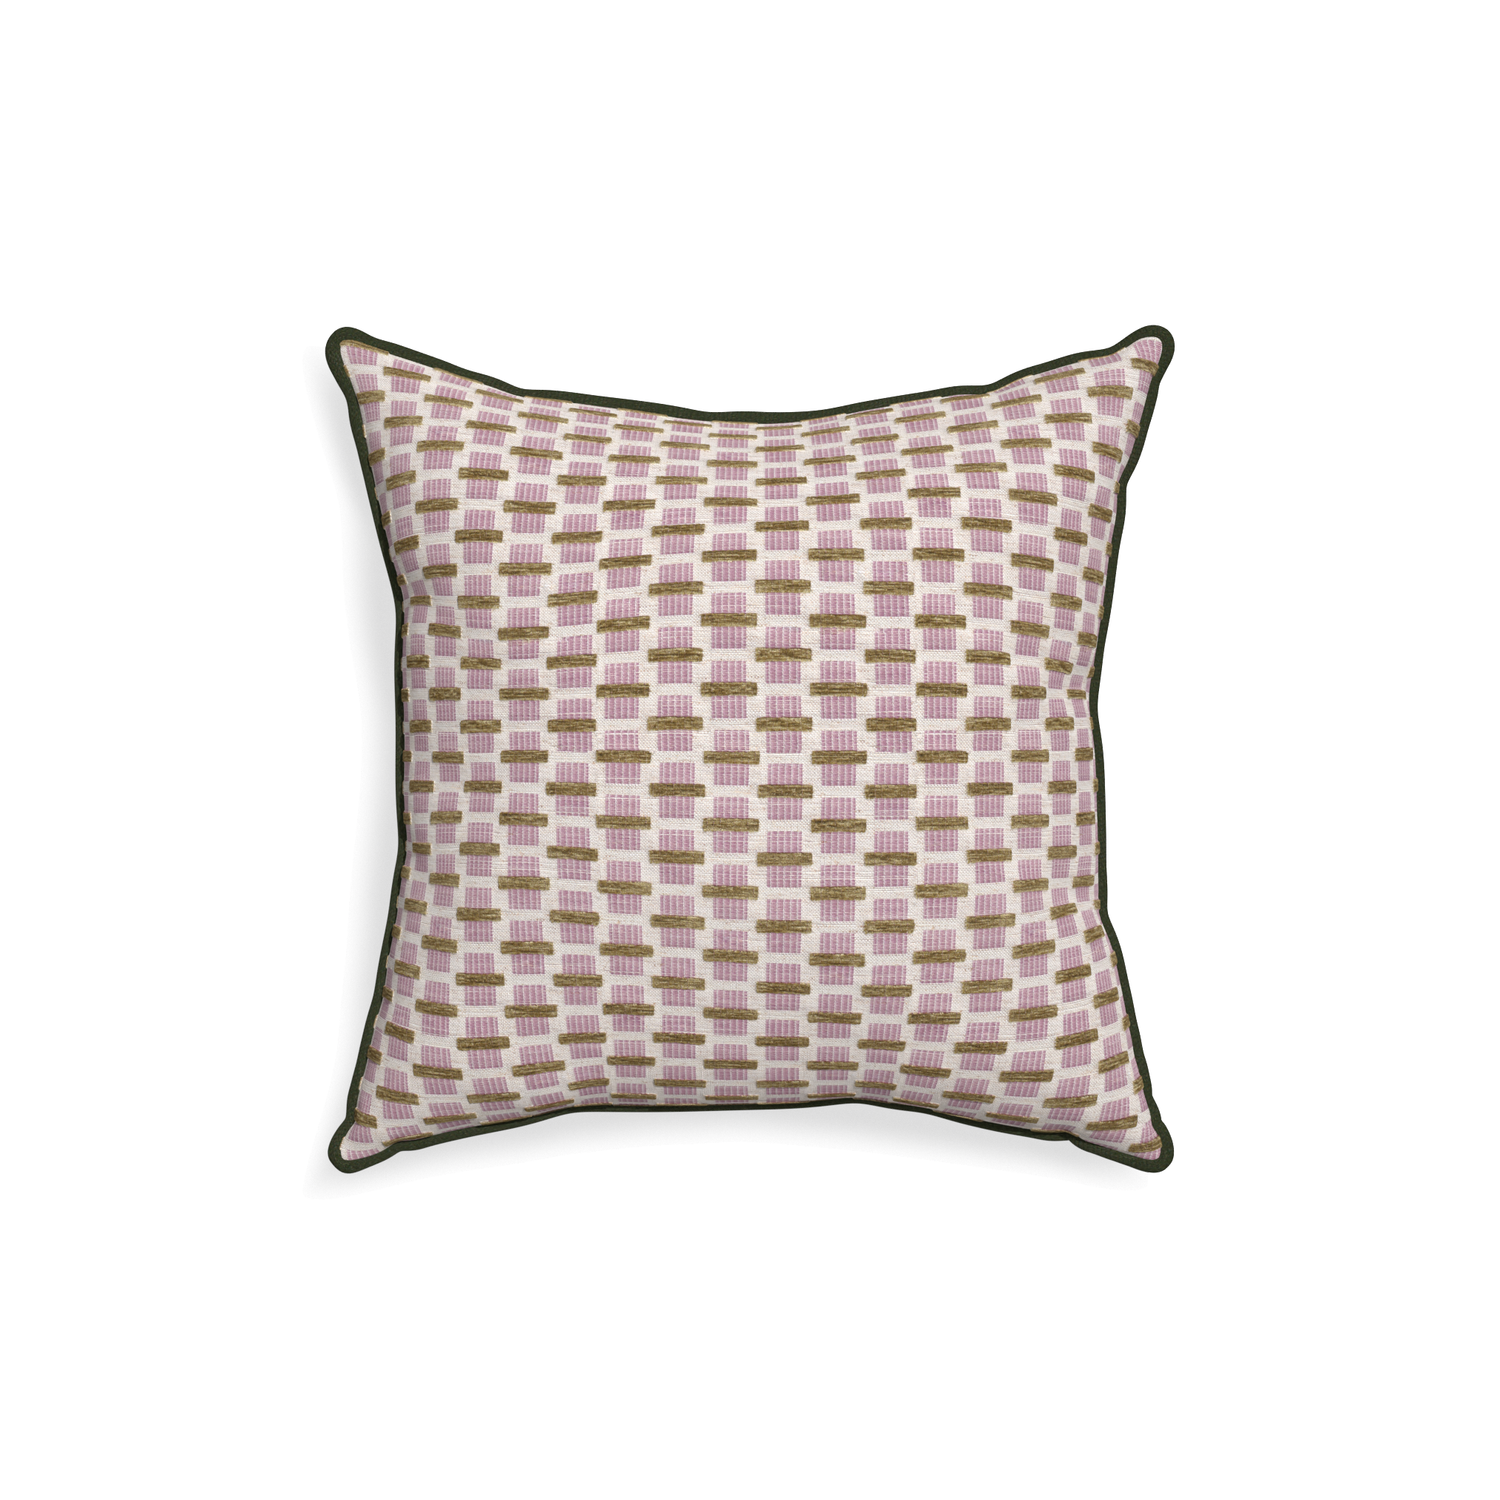 18-square willow orchid custom pink geometric chenillepillow with f piping on white background